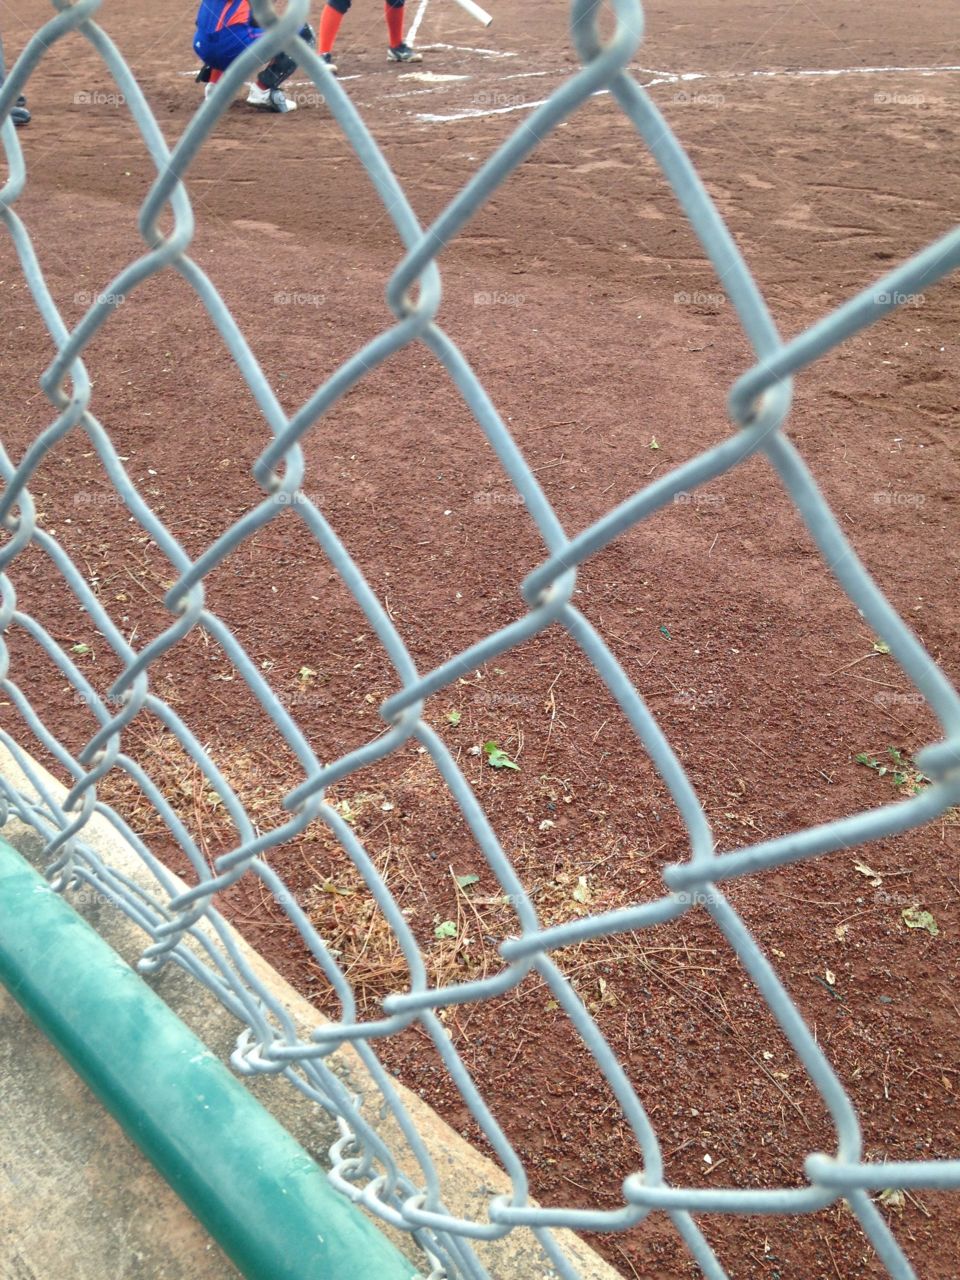 Chain link . Soft ball field where my sister plays 